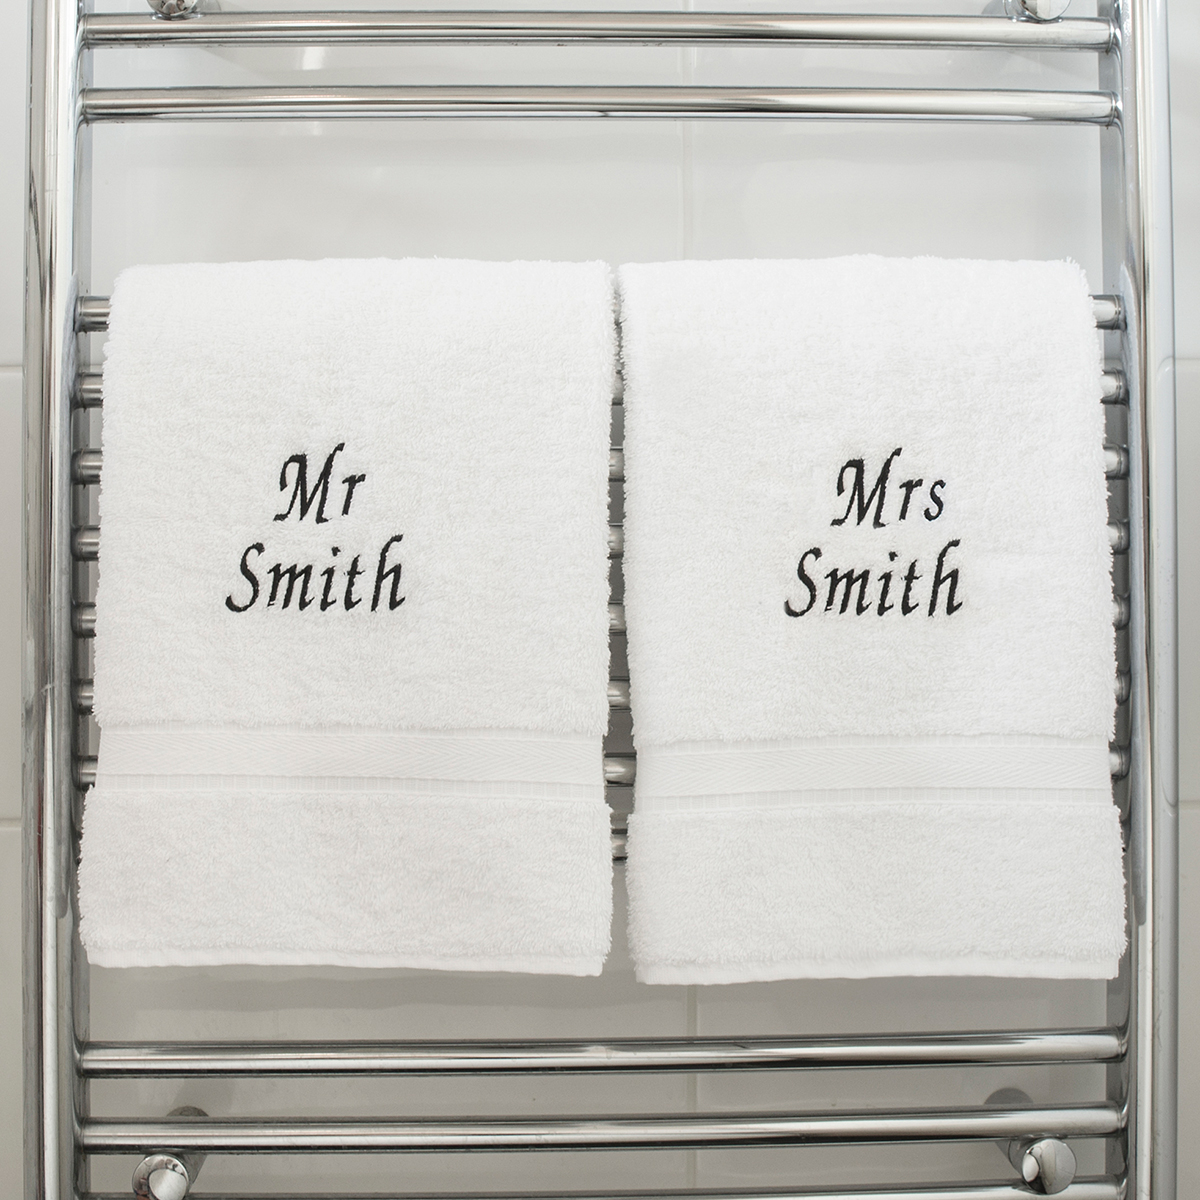 Personalised His and Hers Hand Towels